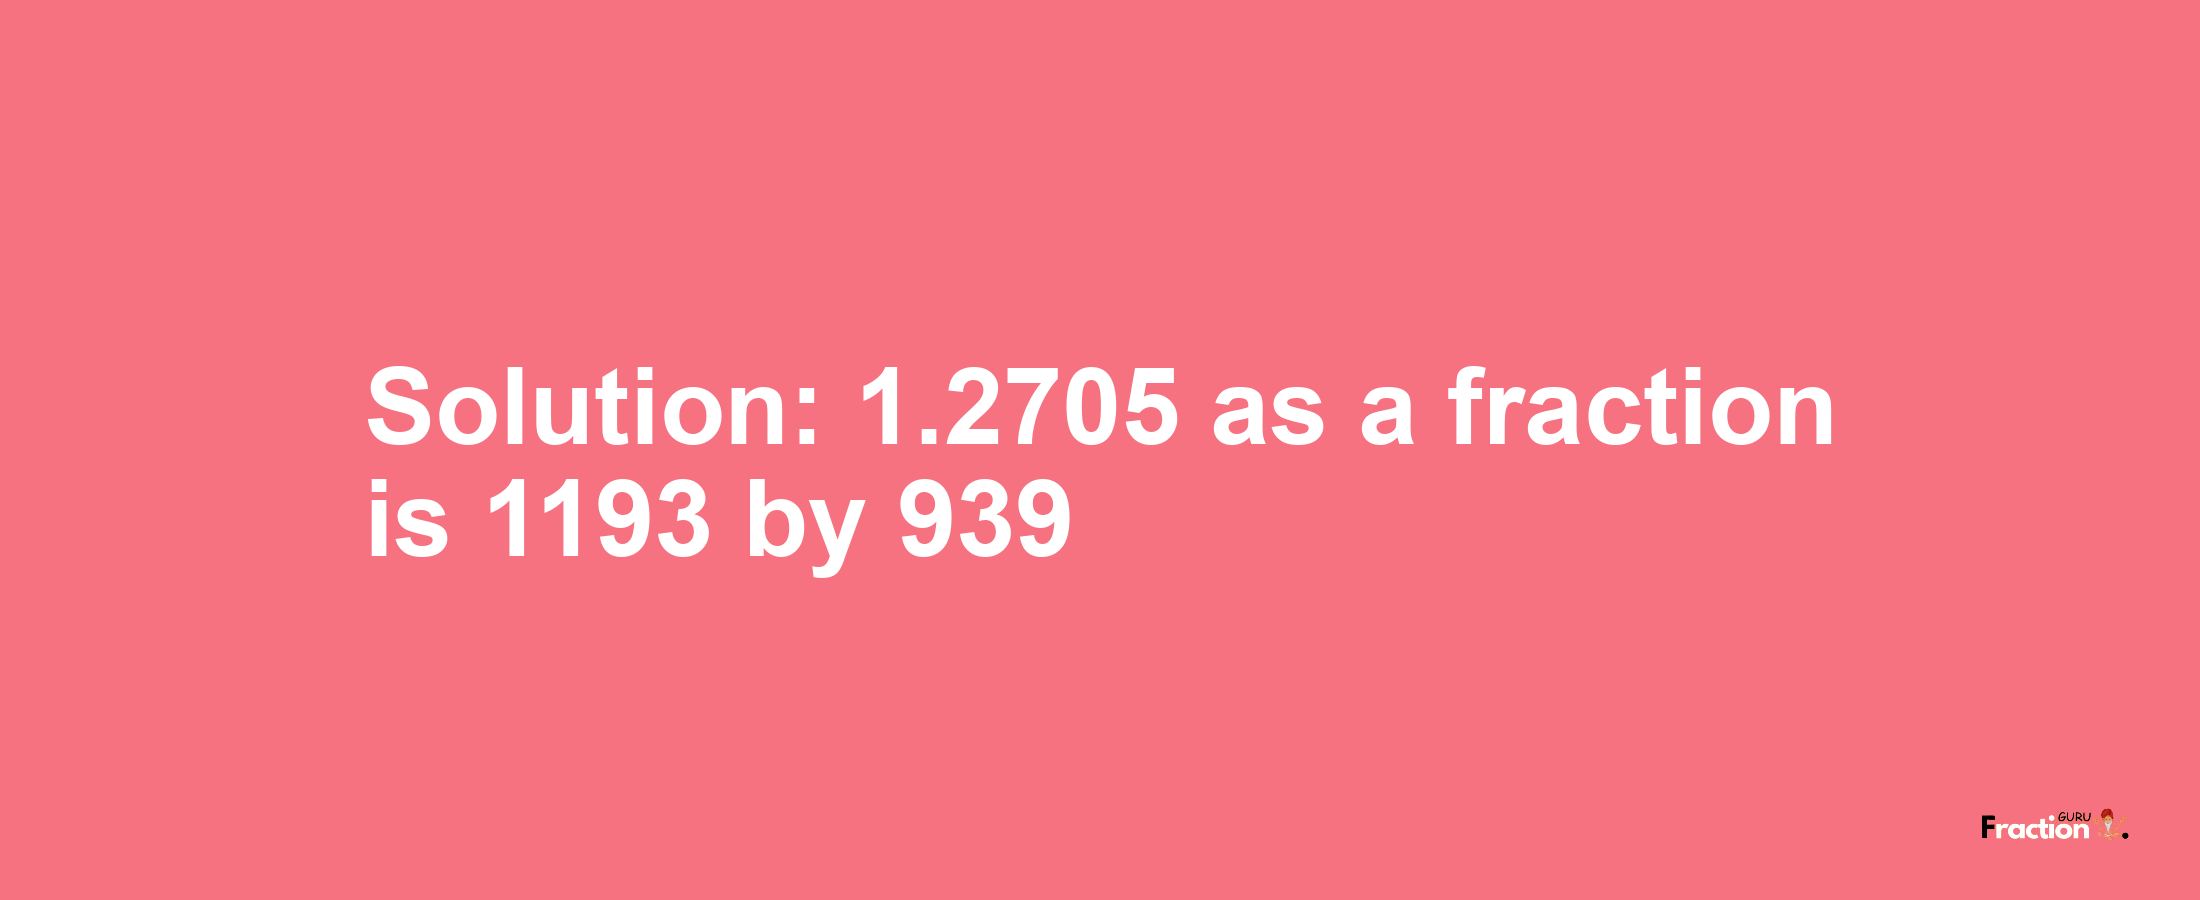 Solution:1.2705 as a fraction is 1193/939